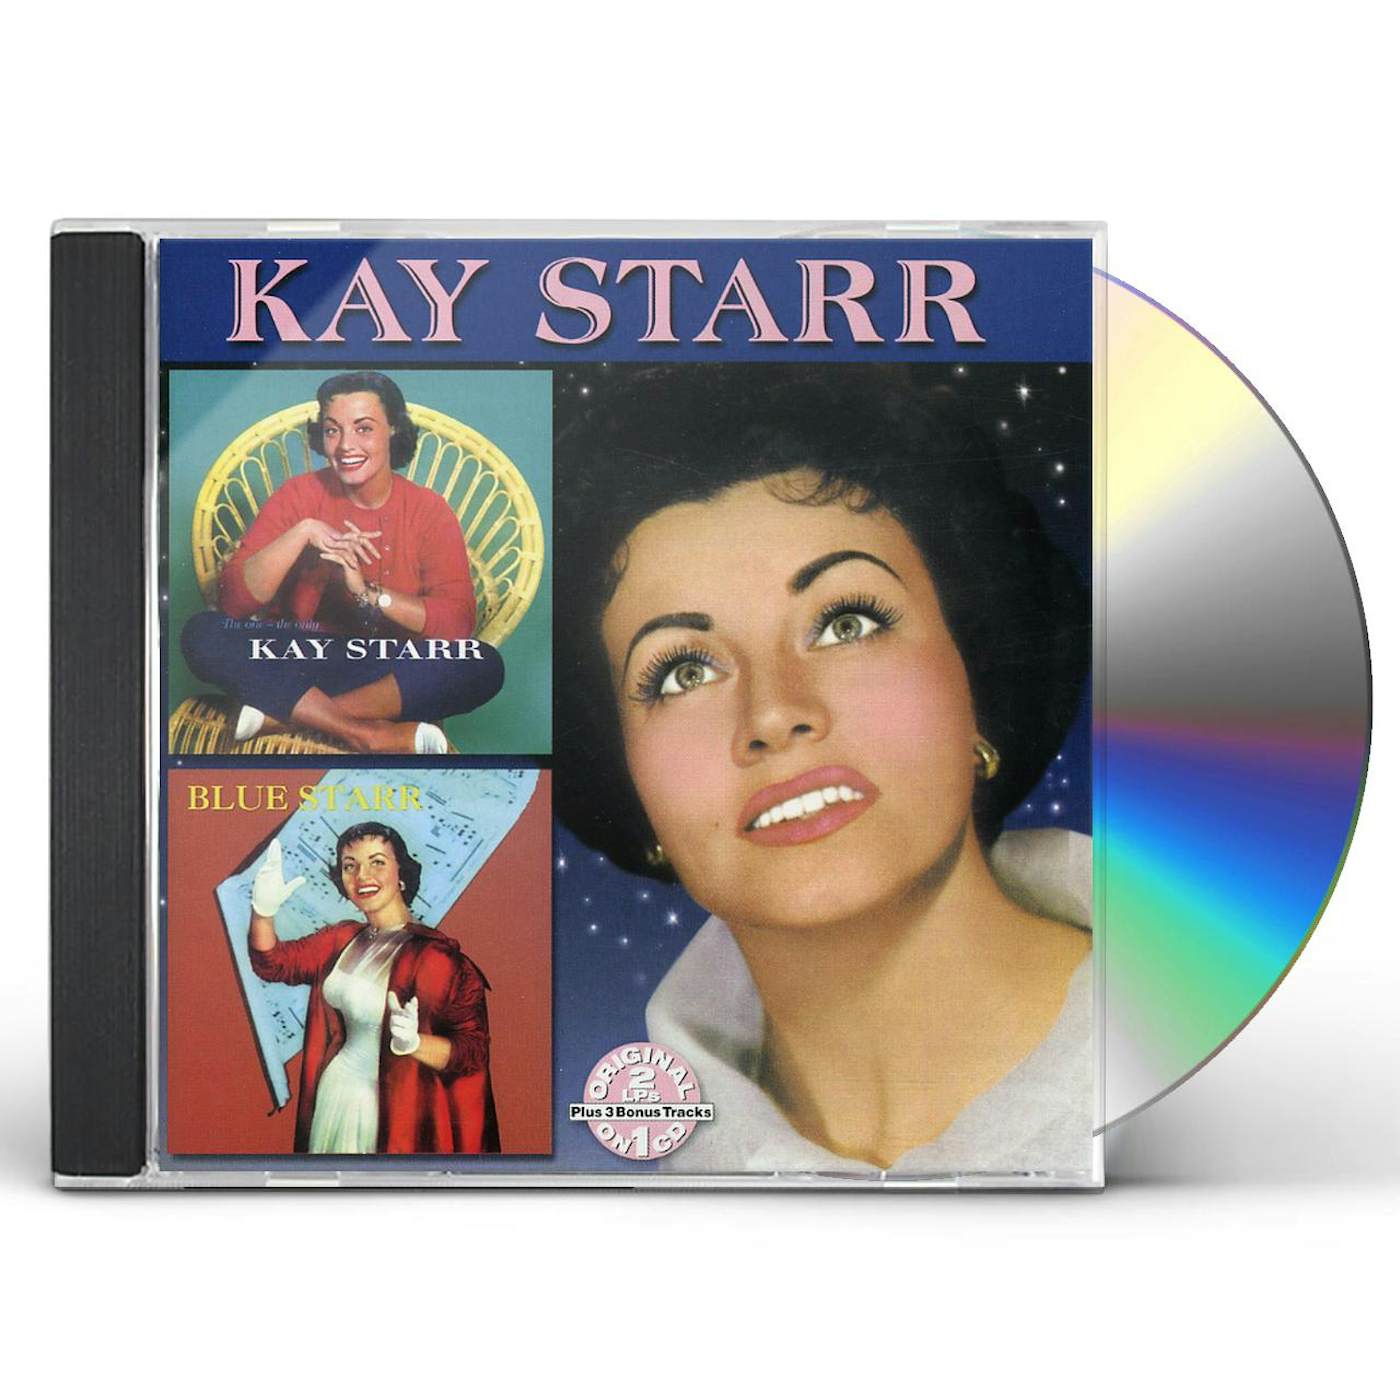 Kay Starr ONE: THE ONLY & BLUE STARR CD